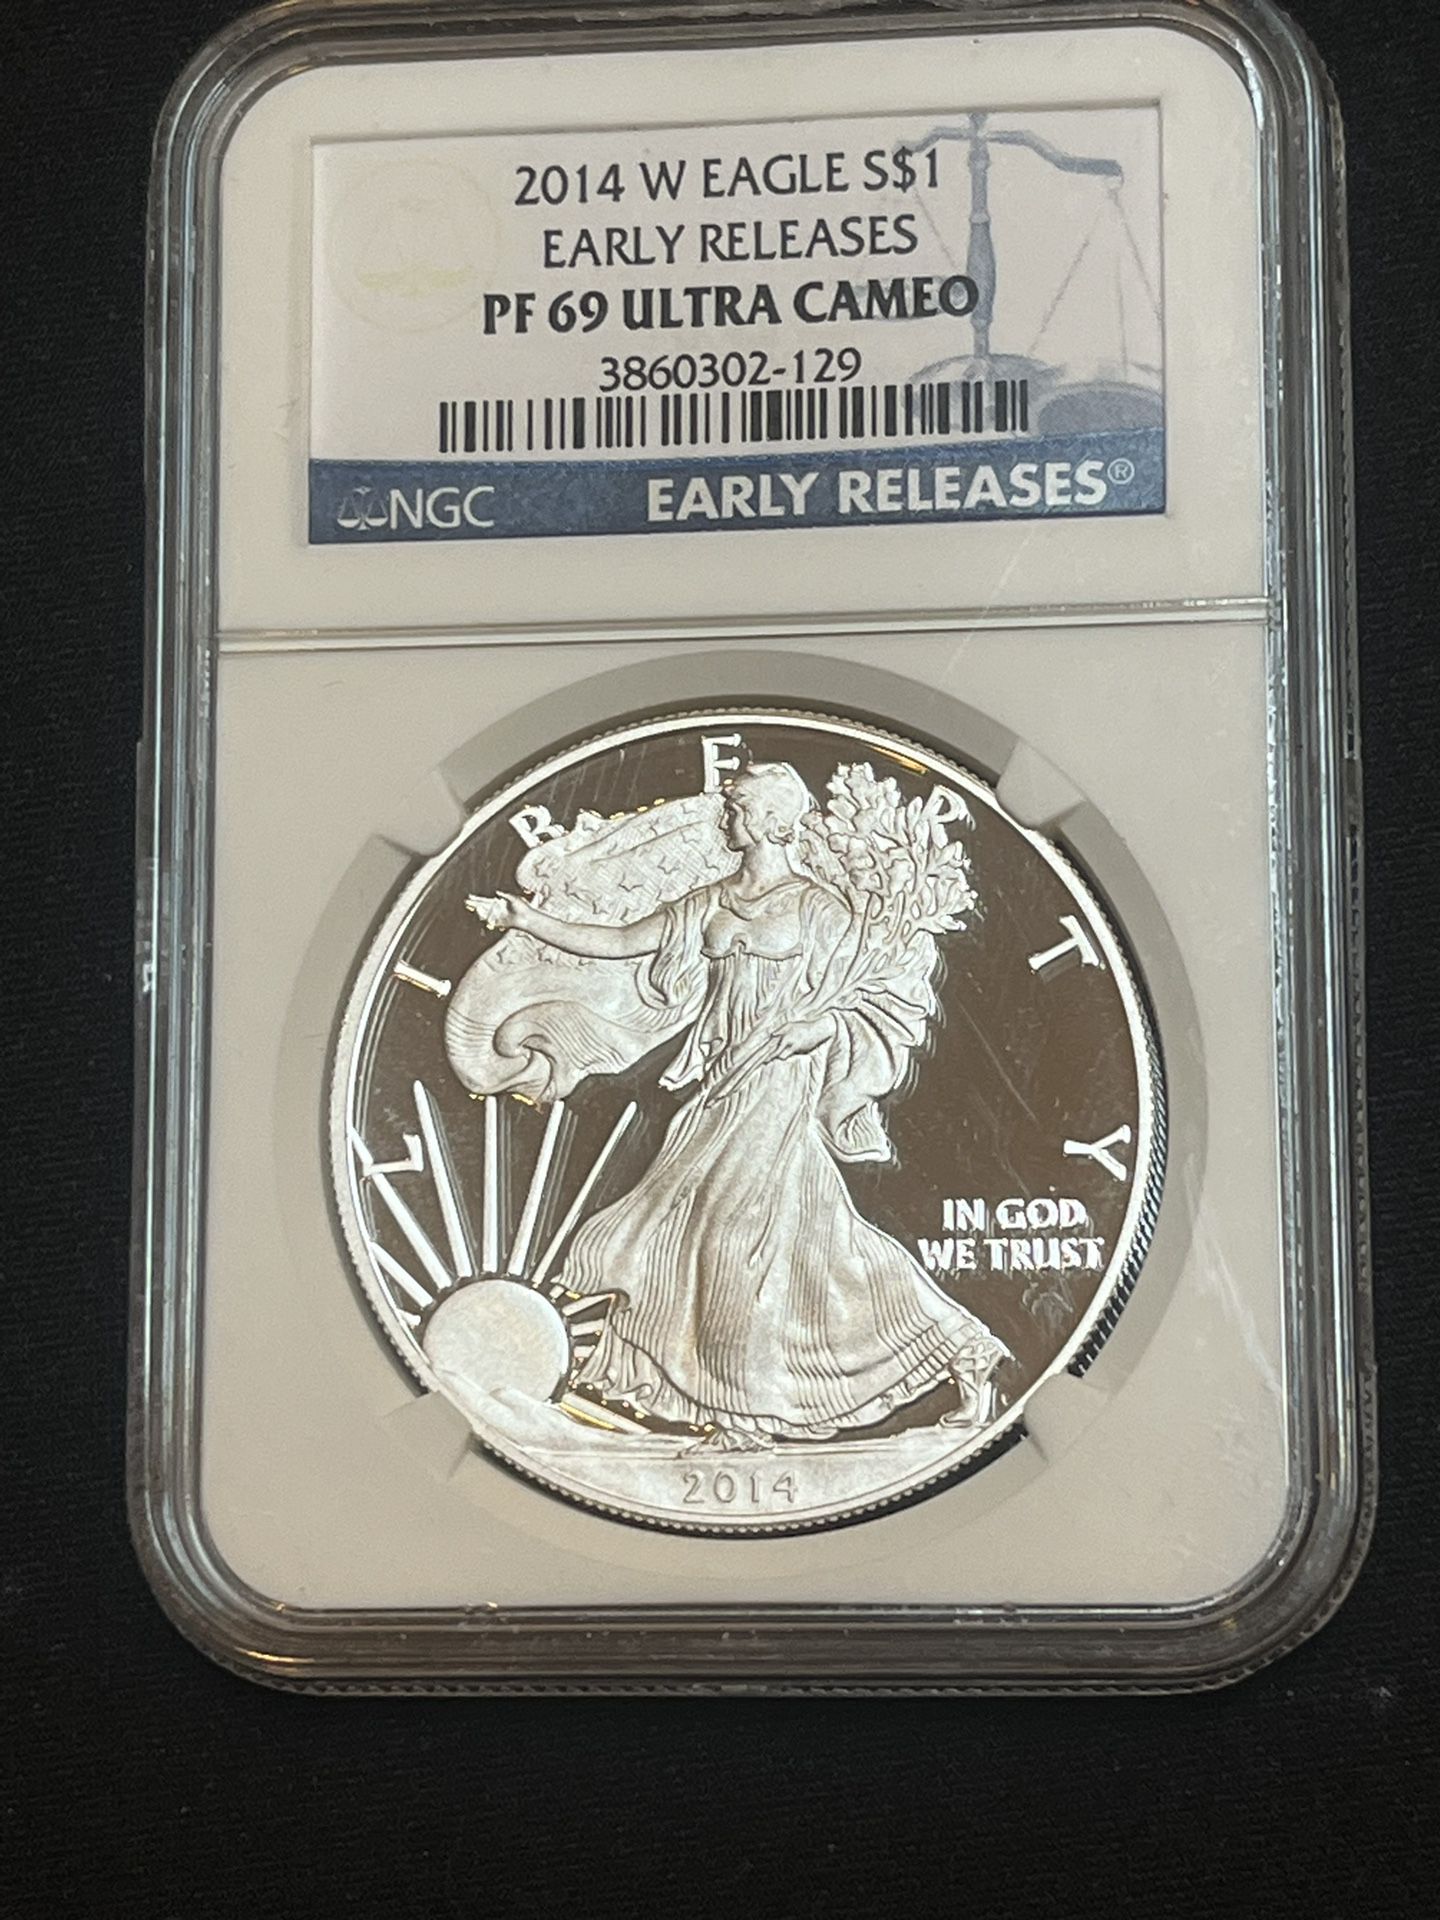 2014 NGC Graded PF 69 Early Release Ultra Cameo W mint Silver Dollar